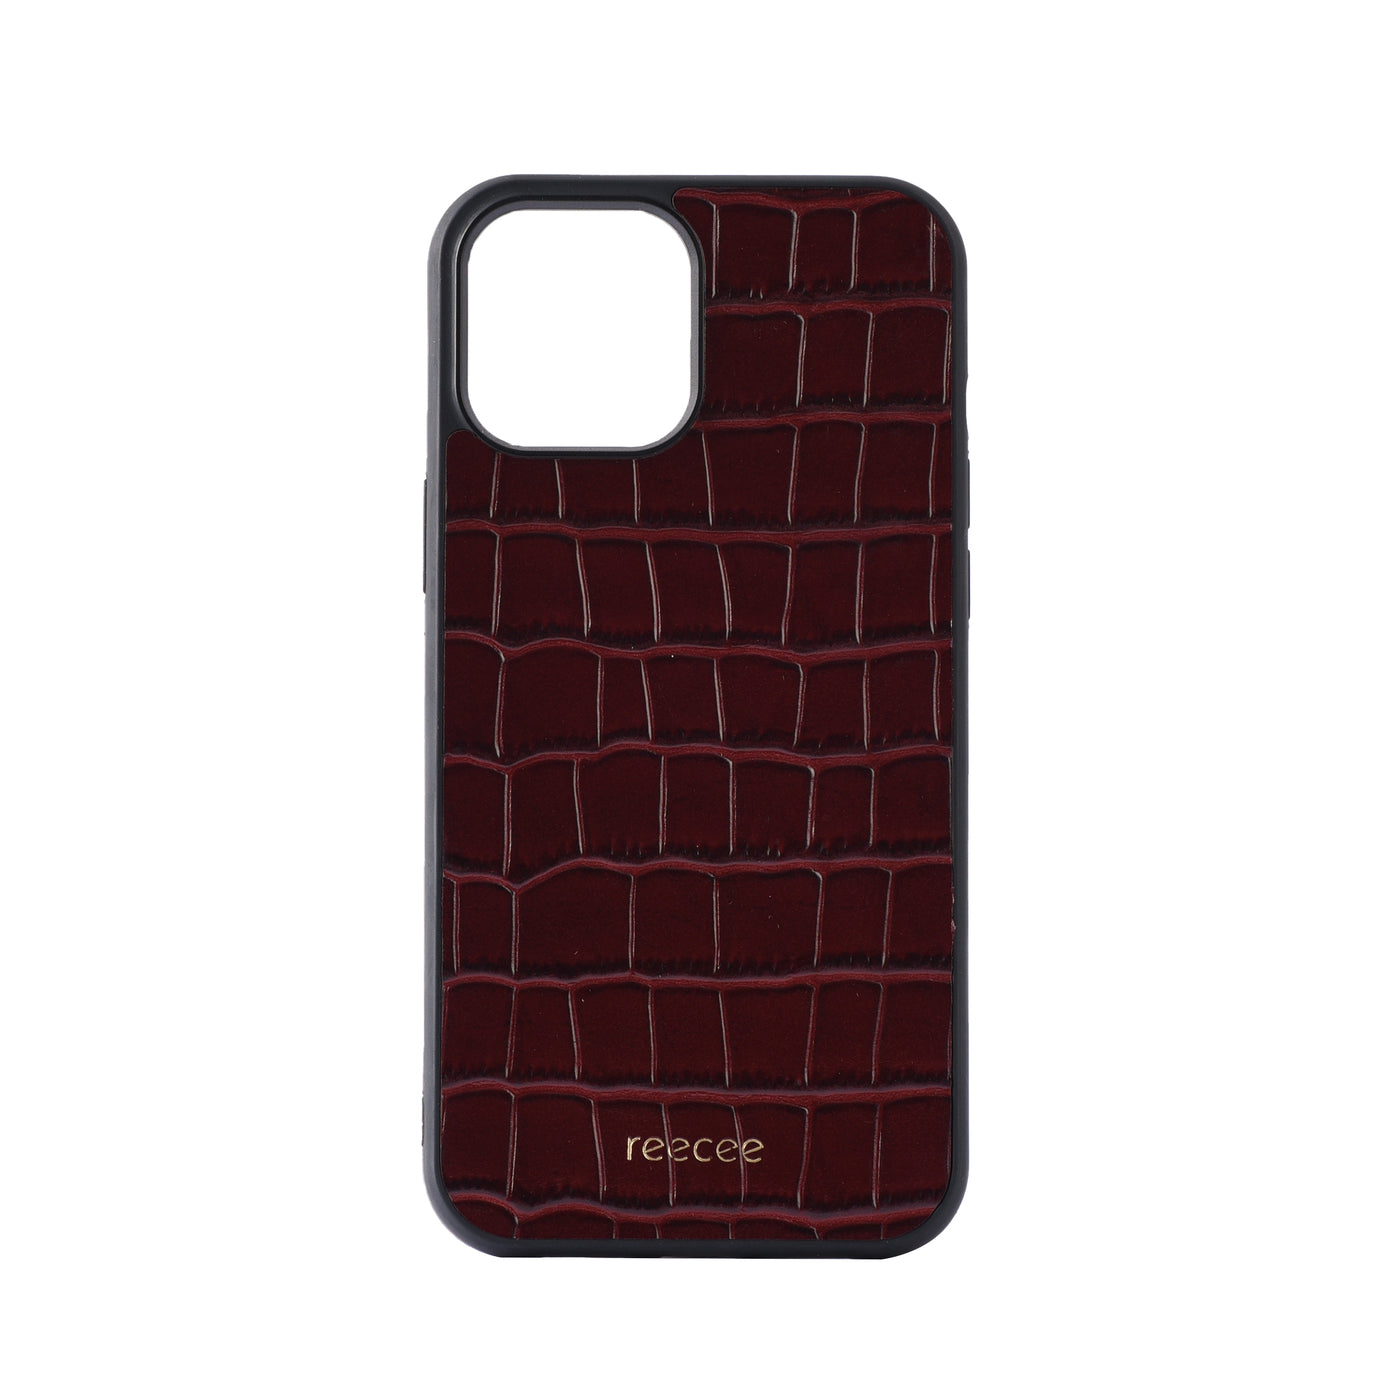 Burgundy iPhone 12 Pro Max Leather Case